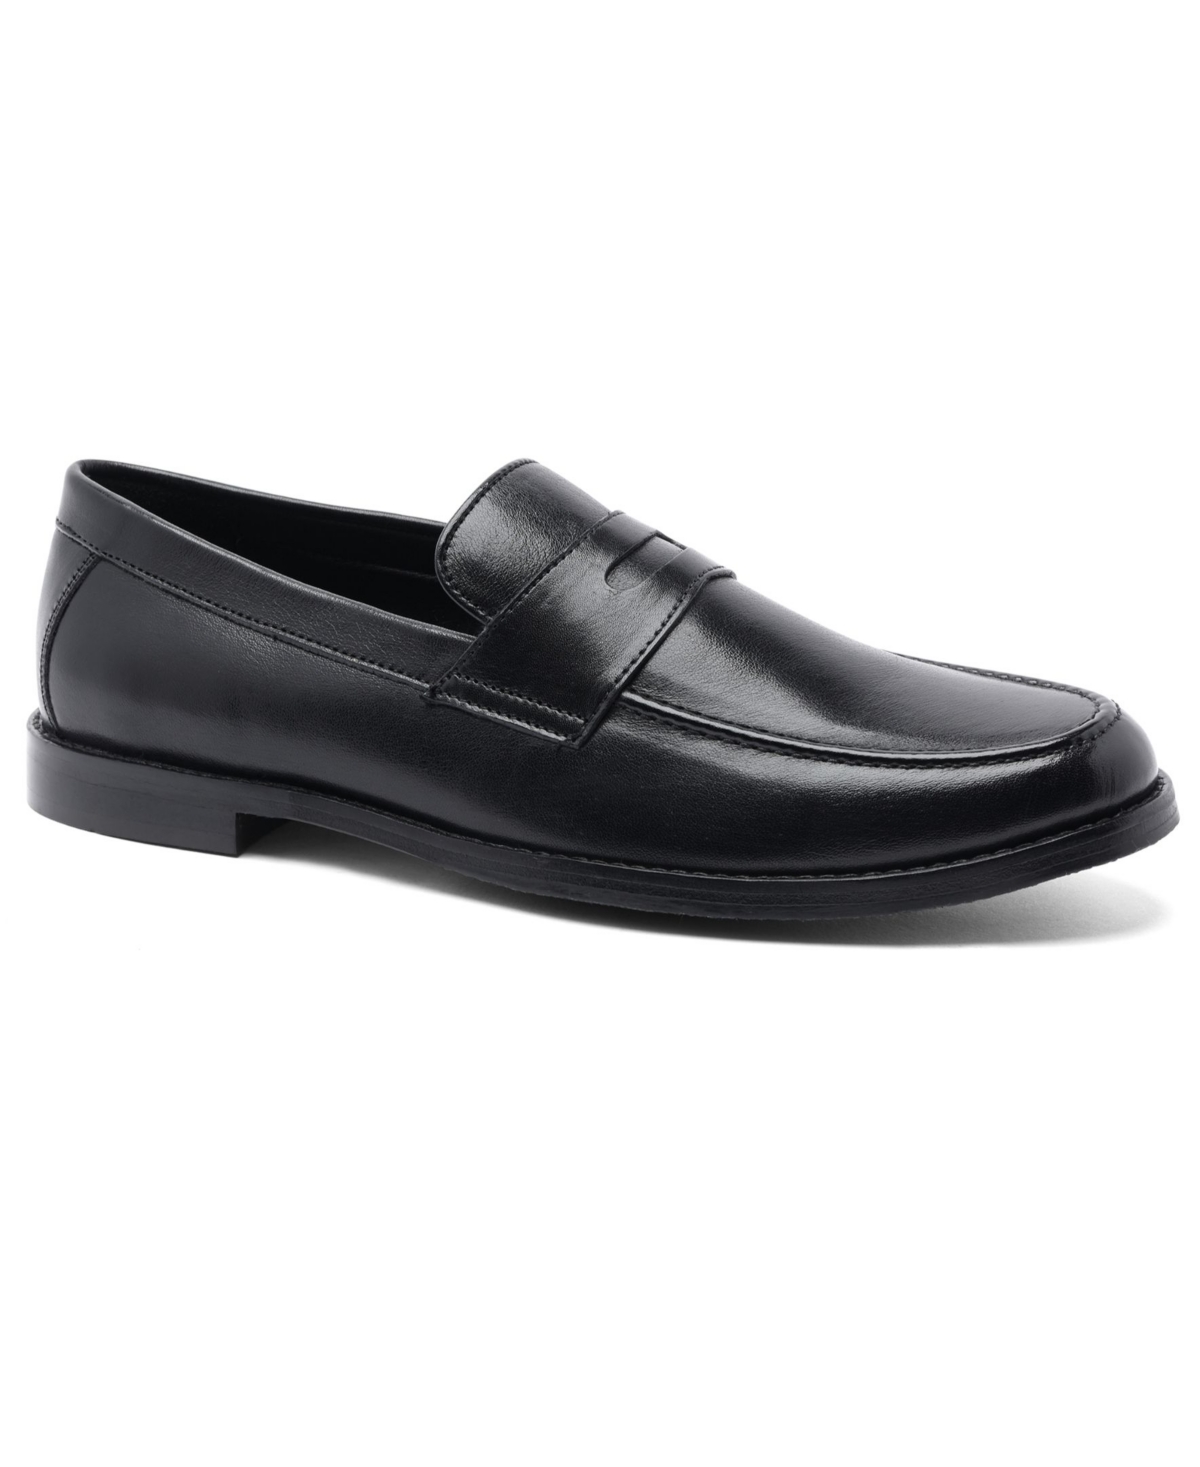 Men's Sherman Penny Loafer Slip-On Leather Shoe - Chocolate Brown